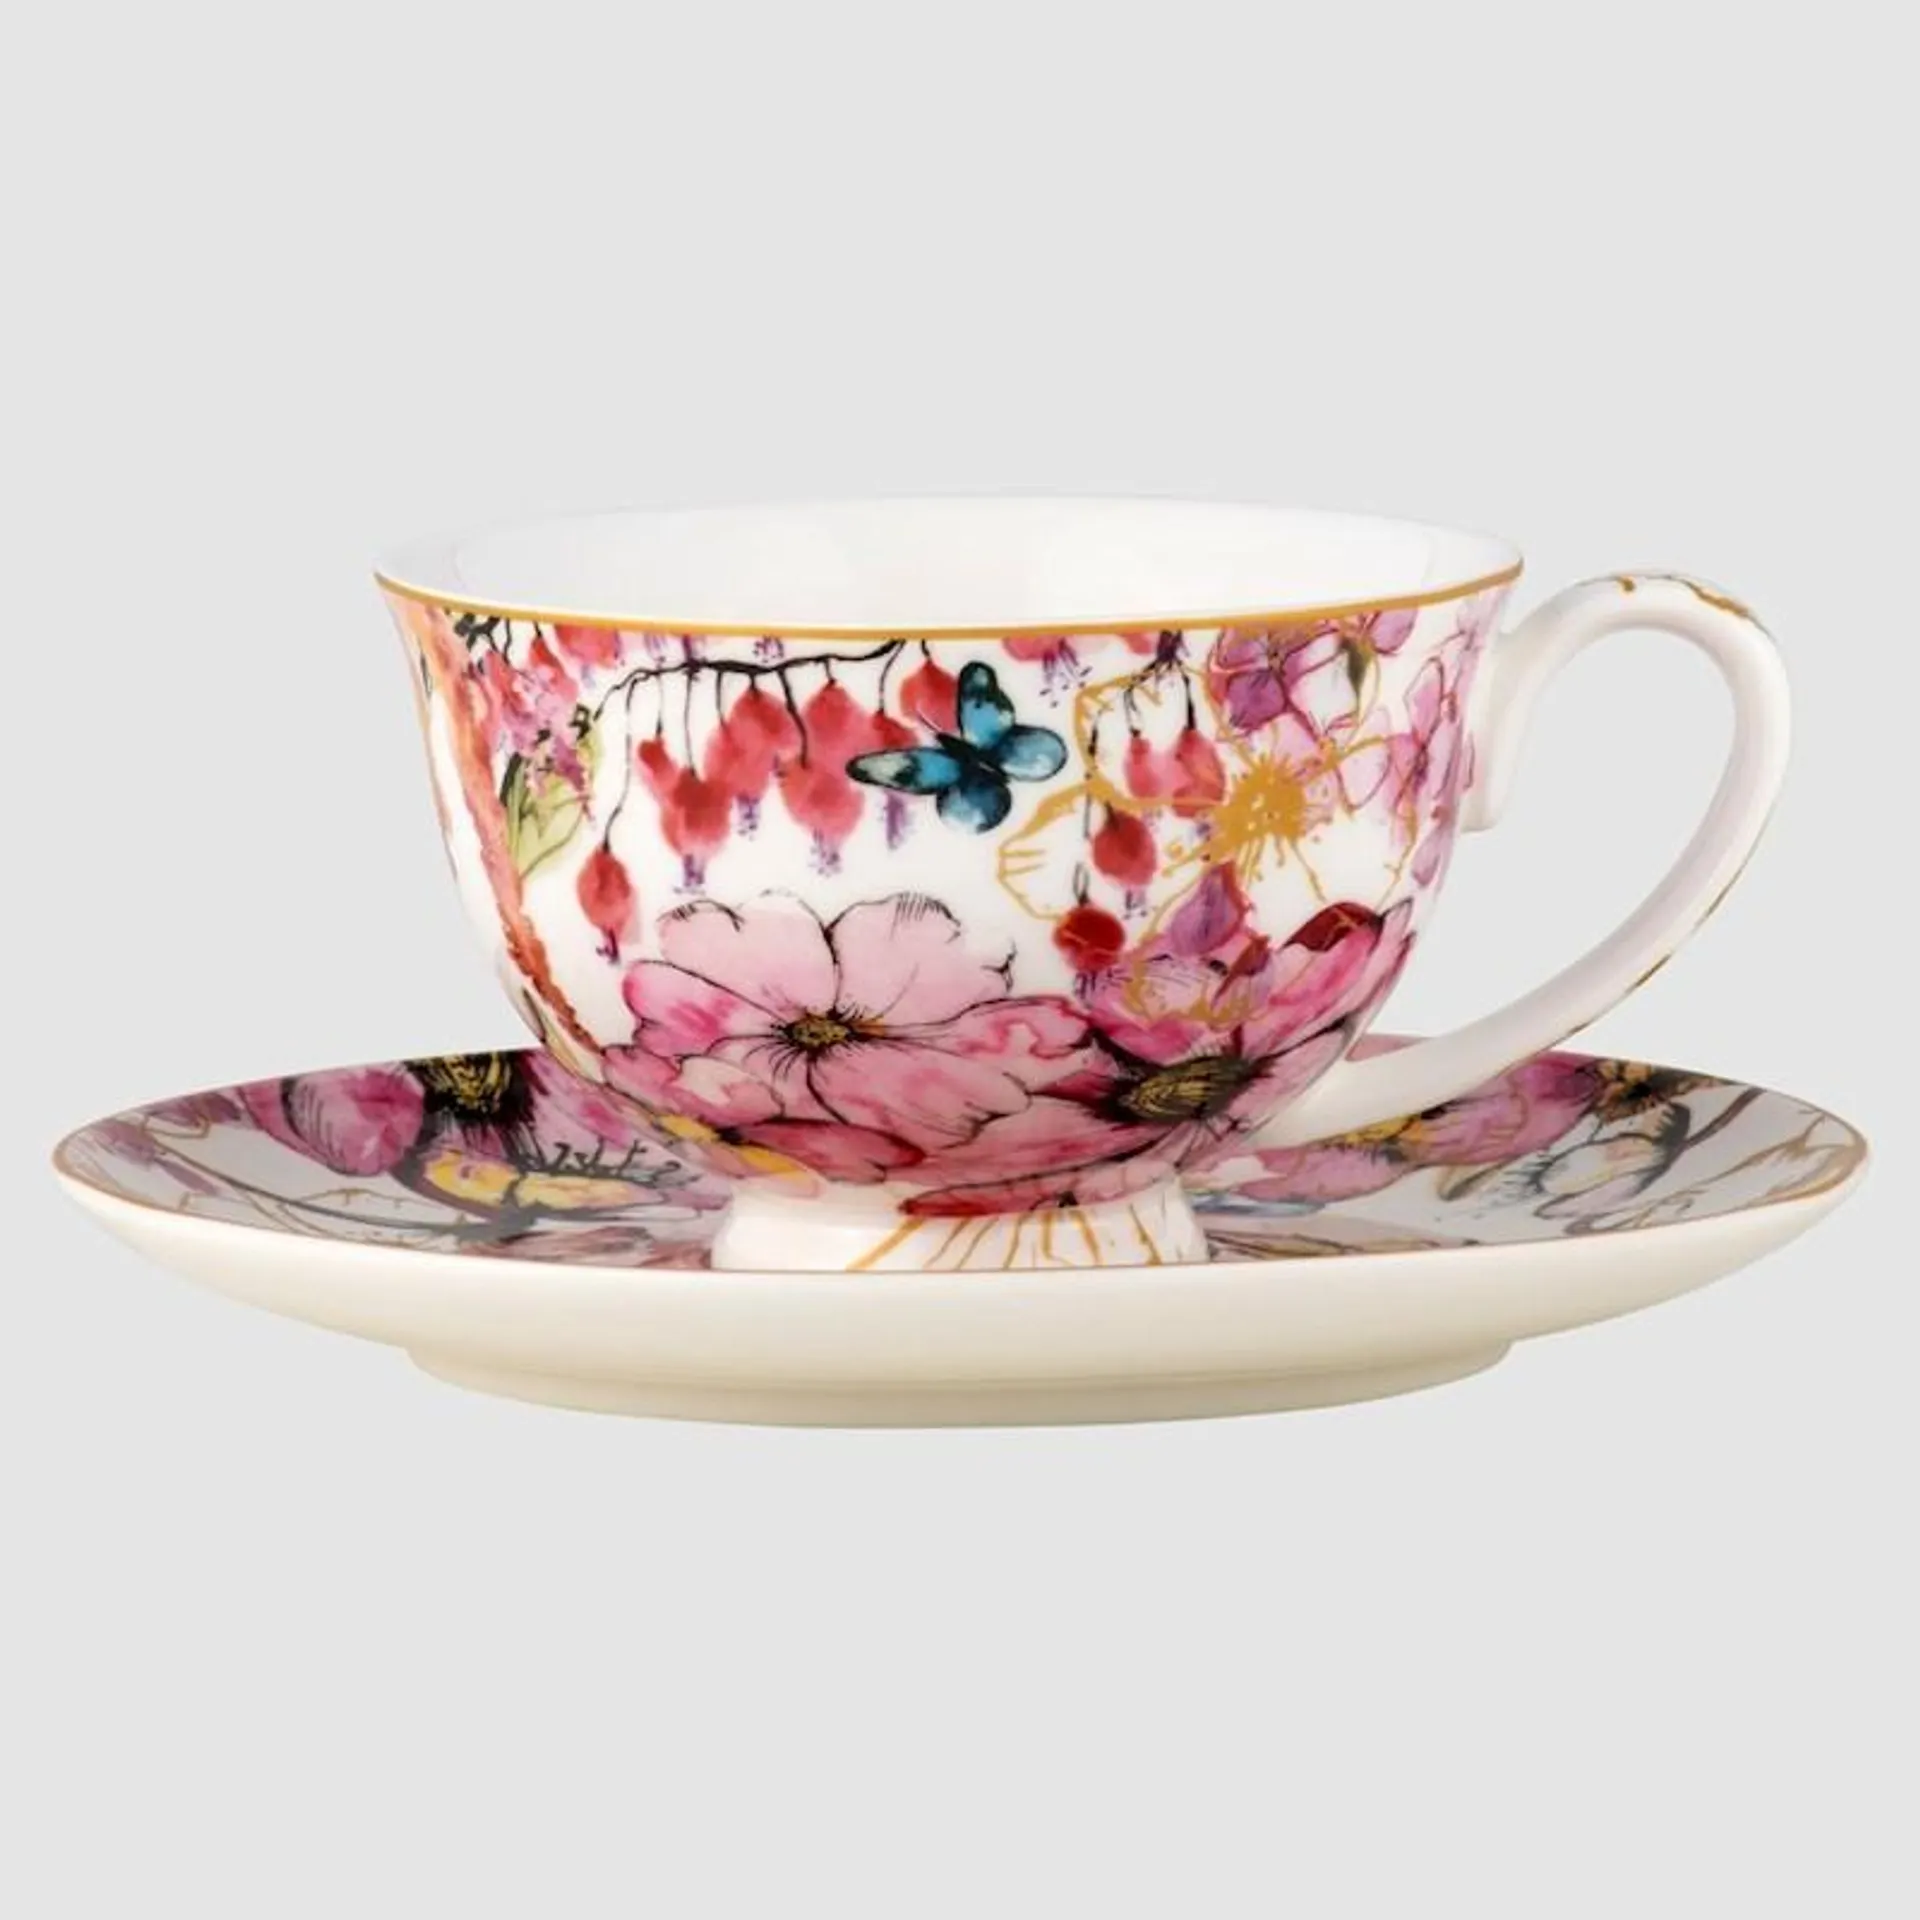 Maxwell & Williams EstelleM Enchantment Footed Cup & Saucer